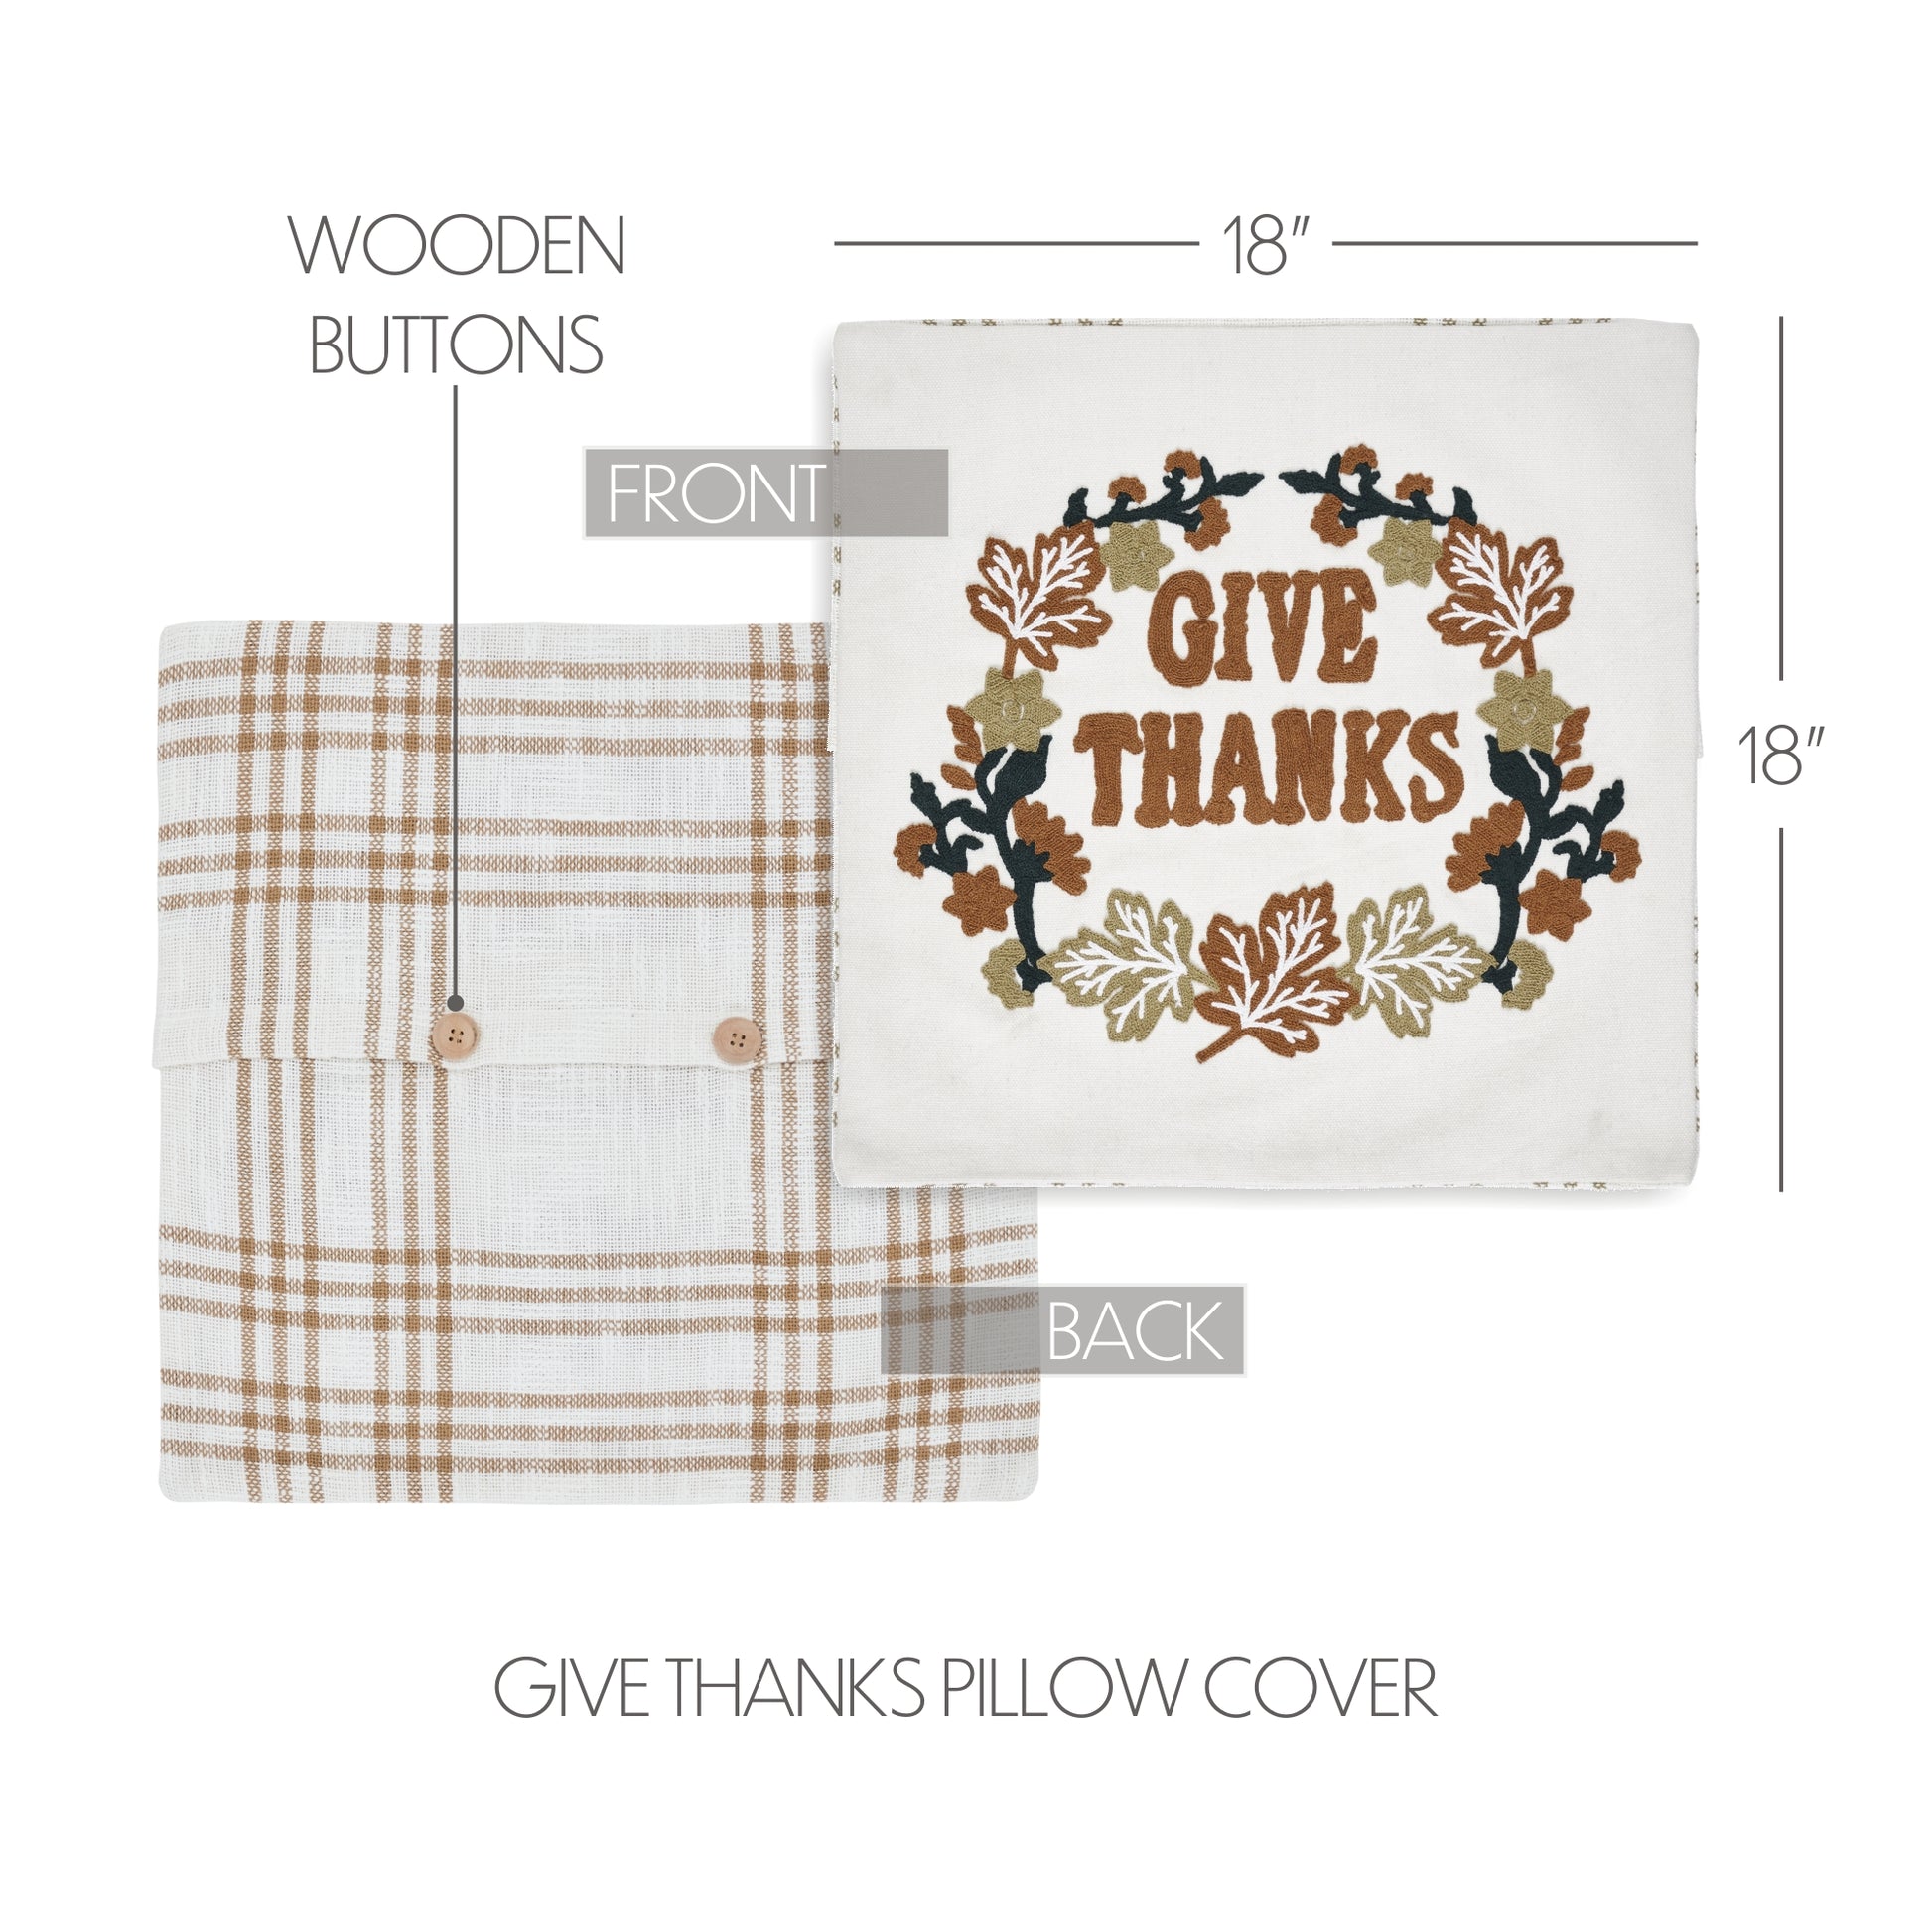 80550-Wheat-Plaid-Give-Thanks-Pillow-Cover-18x18-image-1